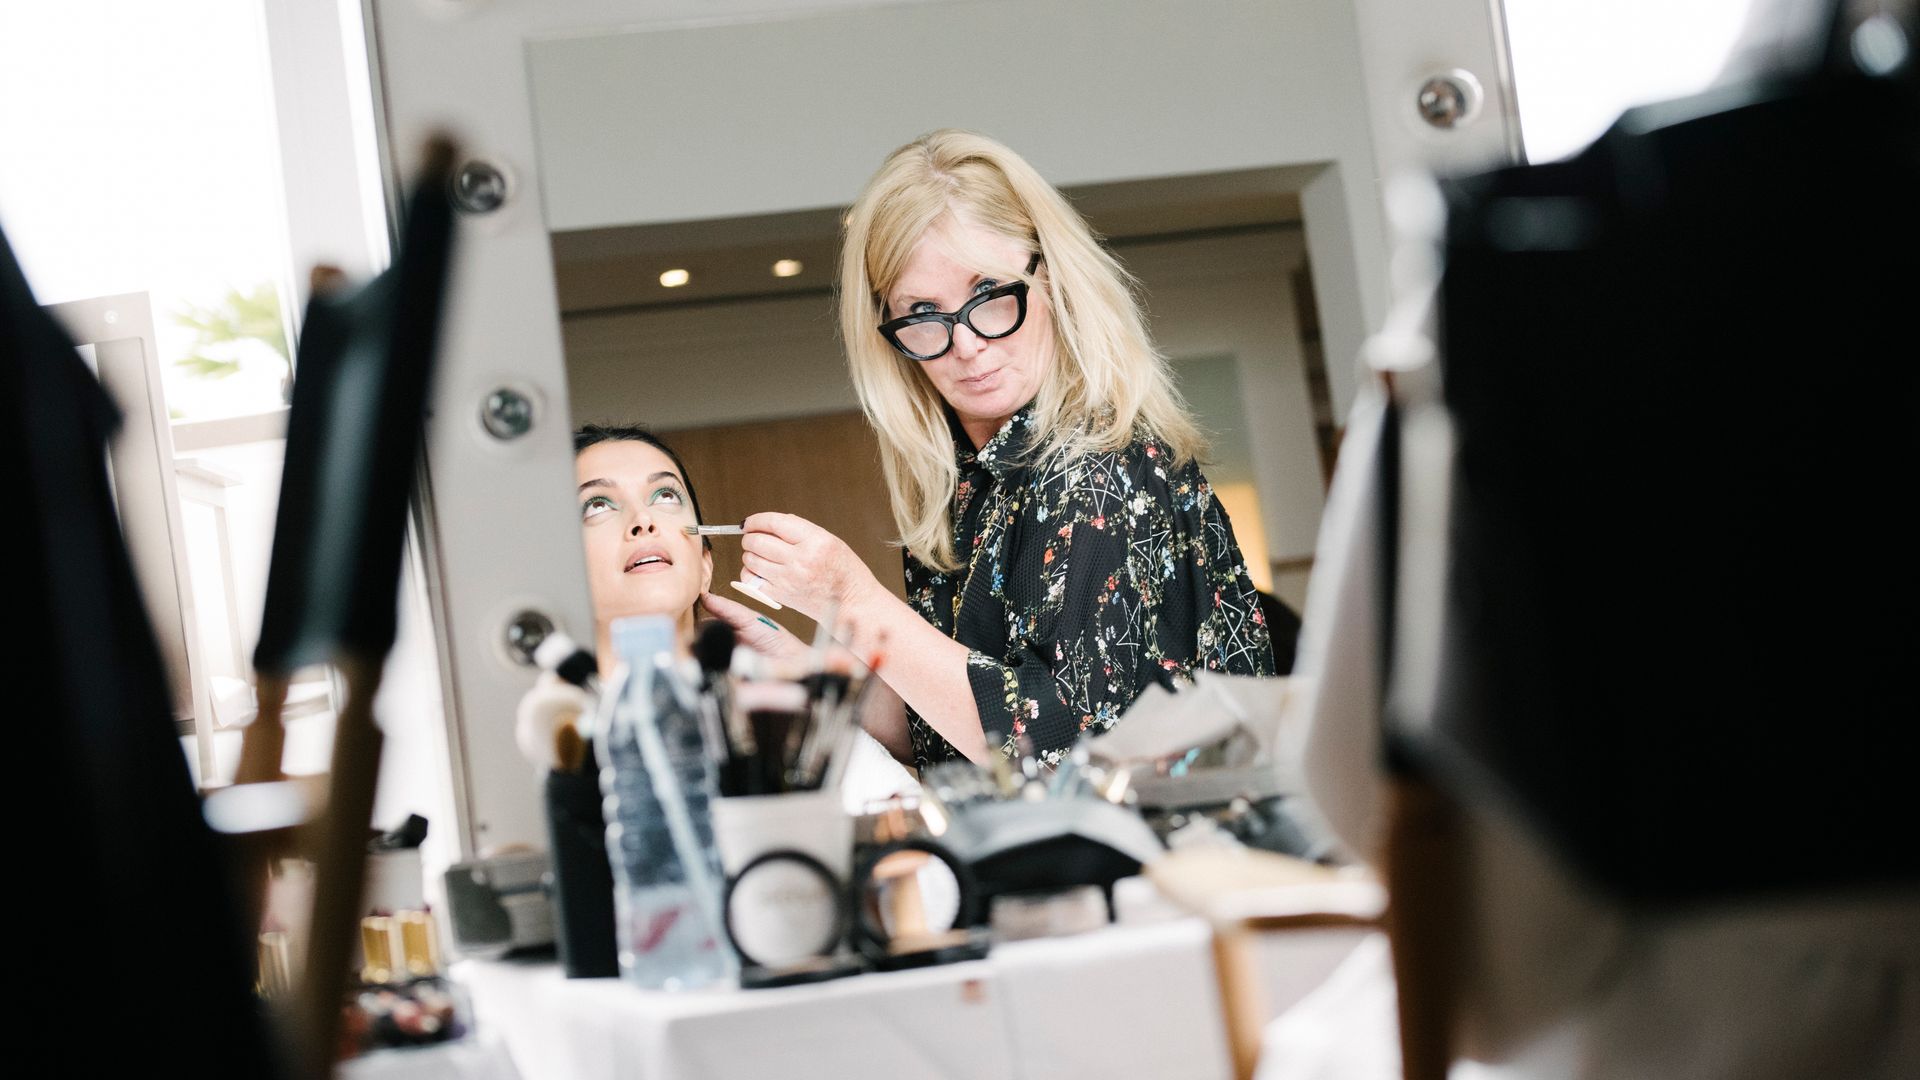 The Beauty Breakdown: Makeup maven Val Garland on why 'it's good to step out of your comfort zone'